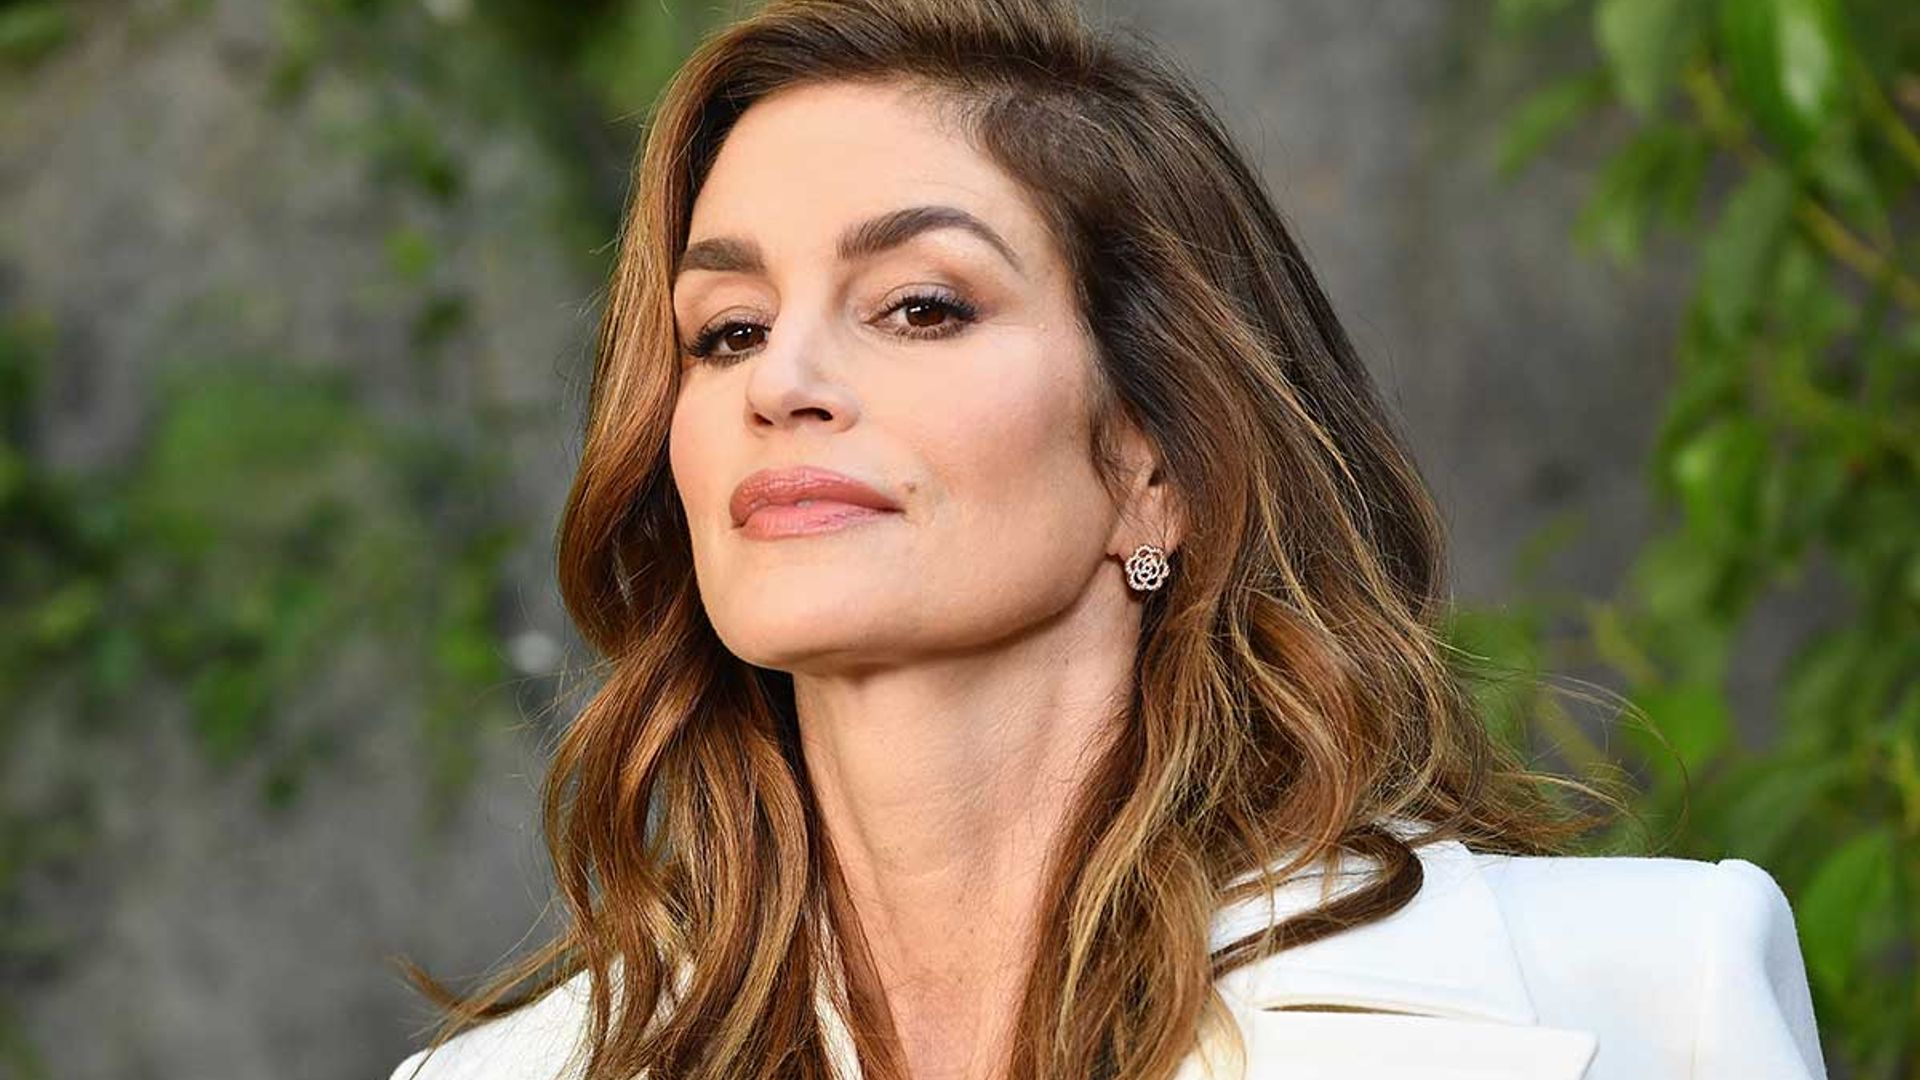 Cindy Crawford looks disco-ready in iridescent party dress